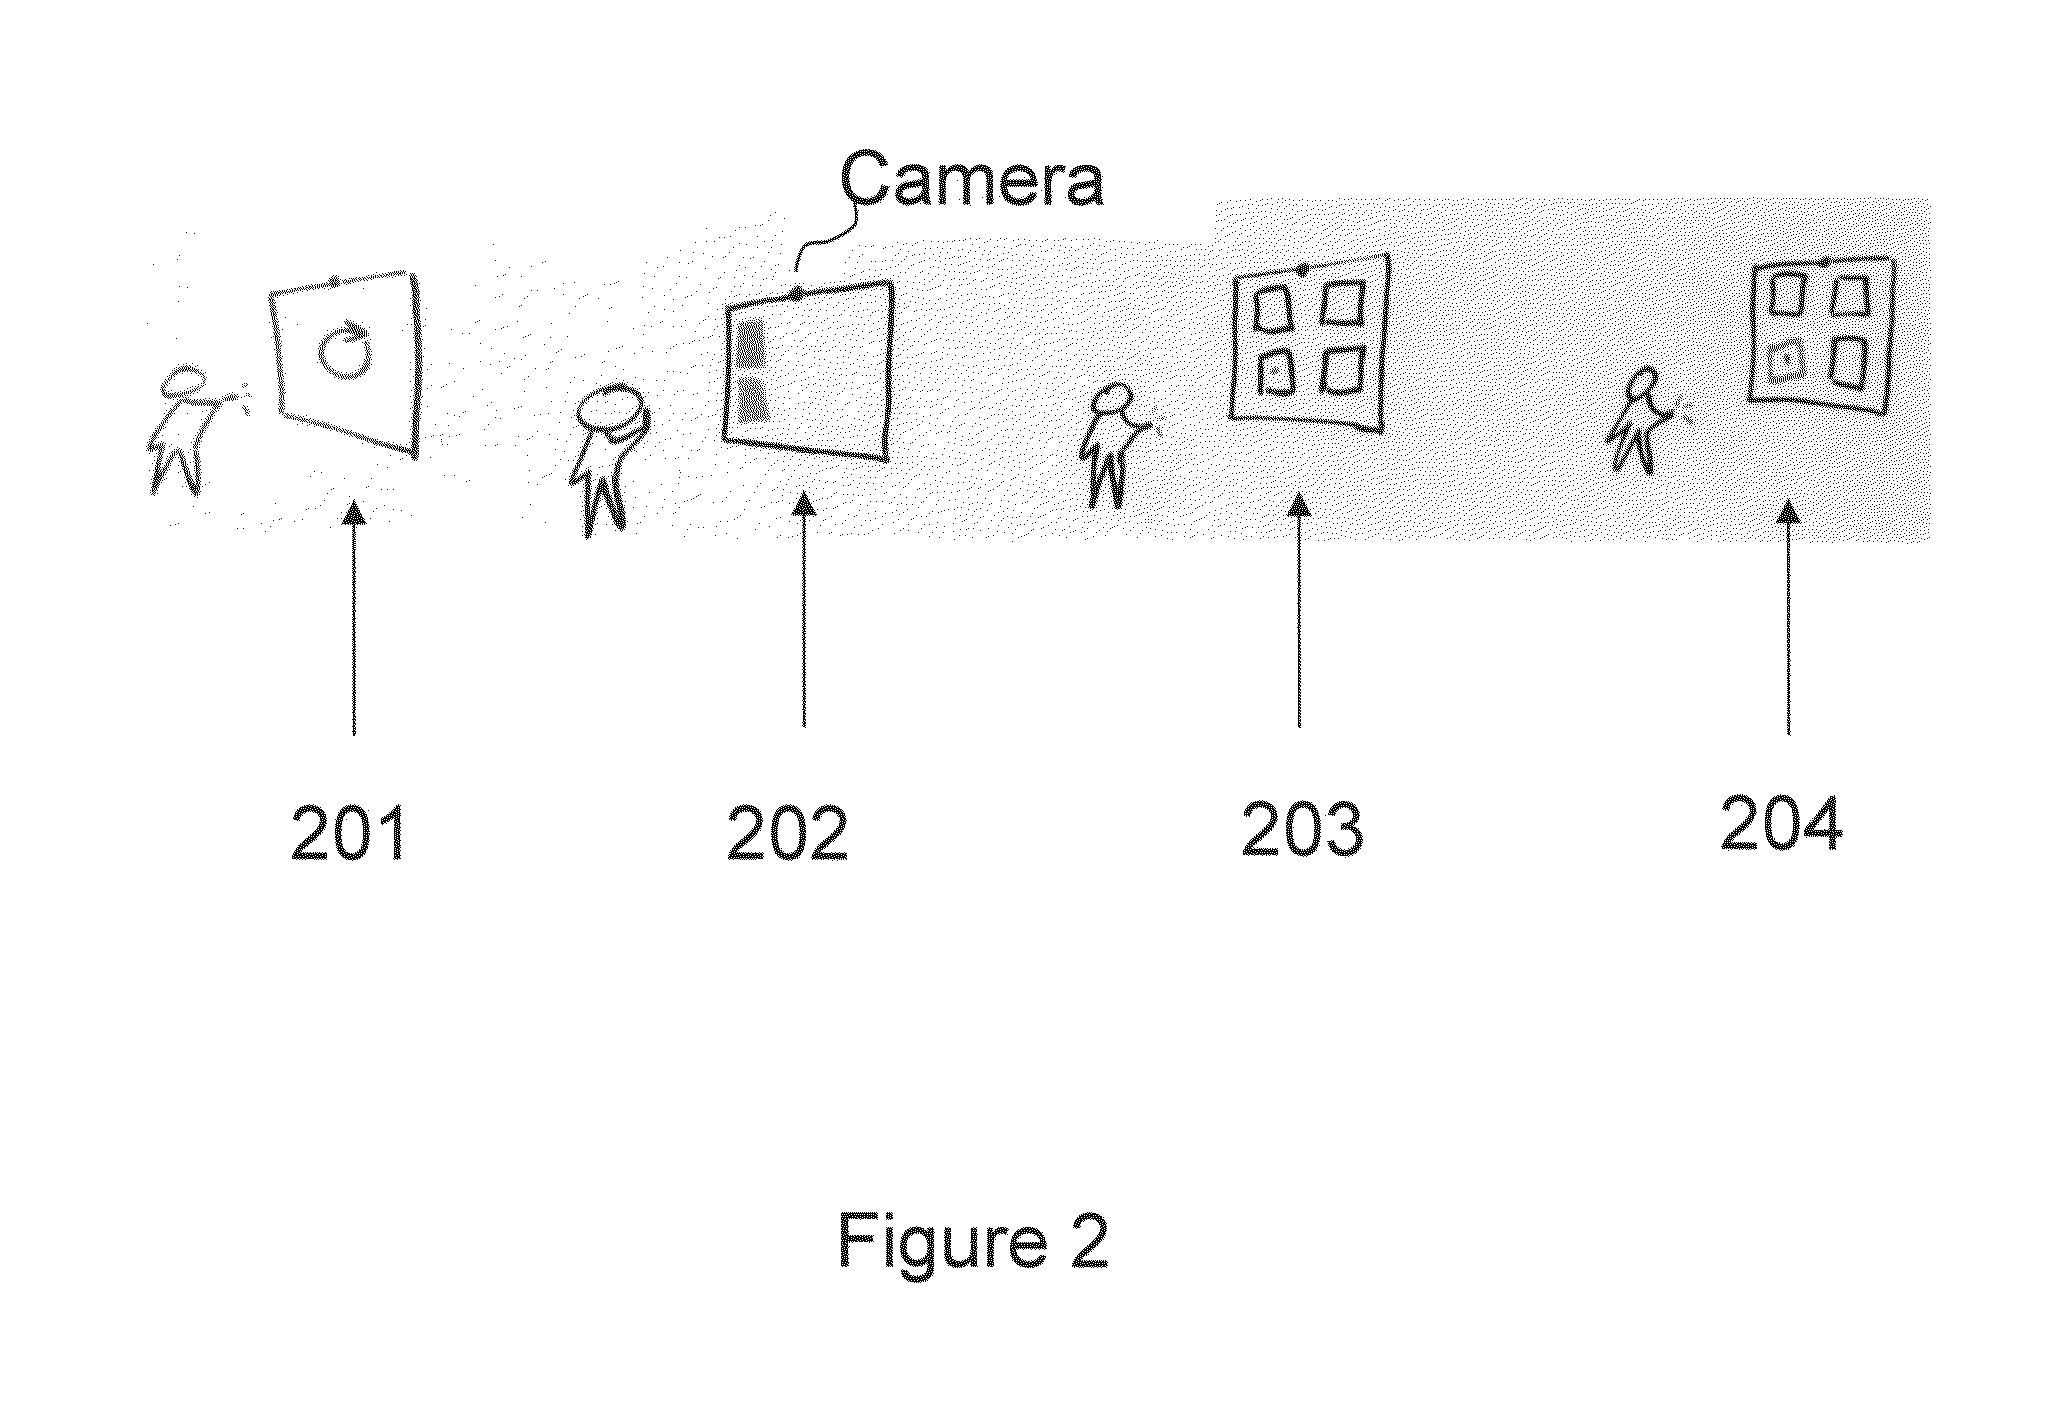 System and method for panning and selecting on large displays using mobile devices without client software